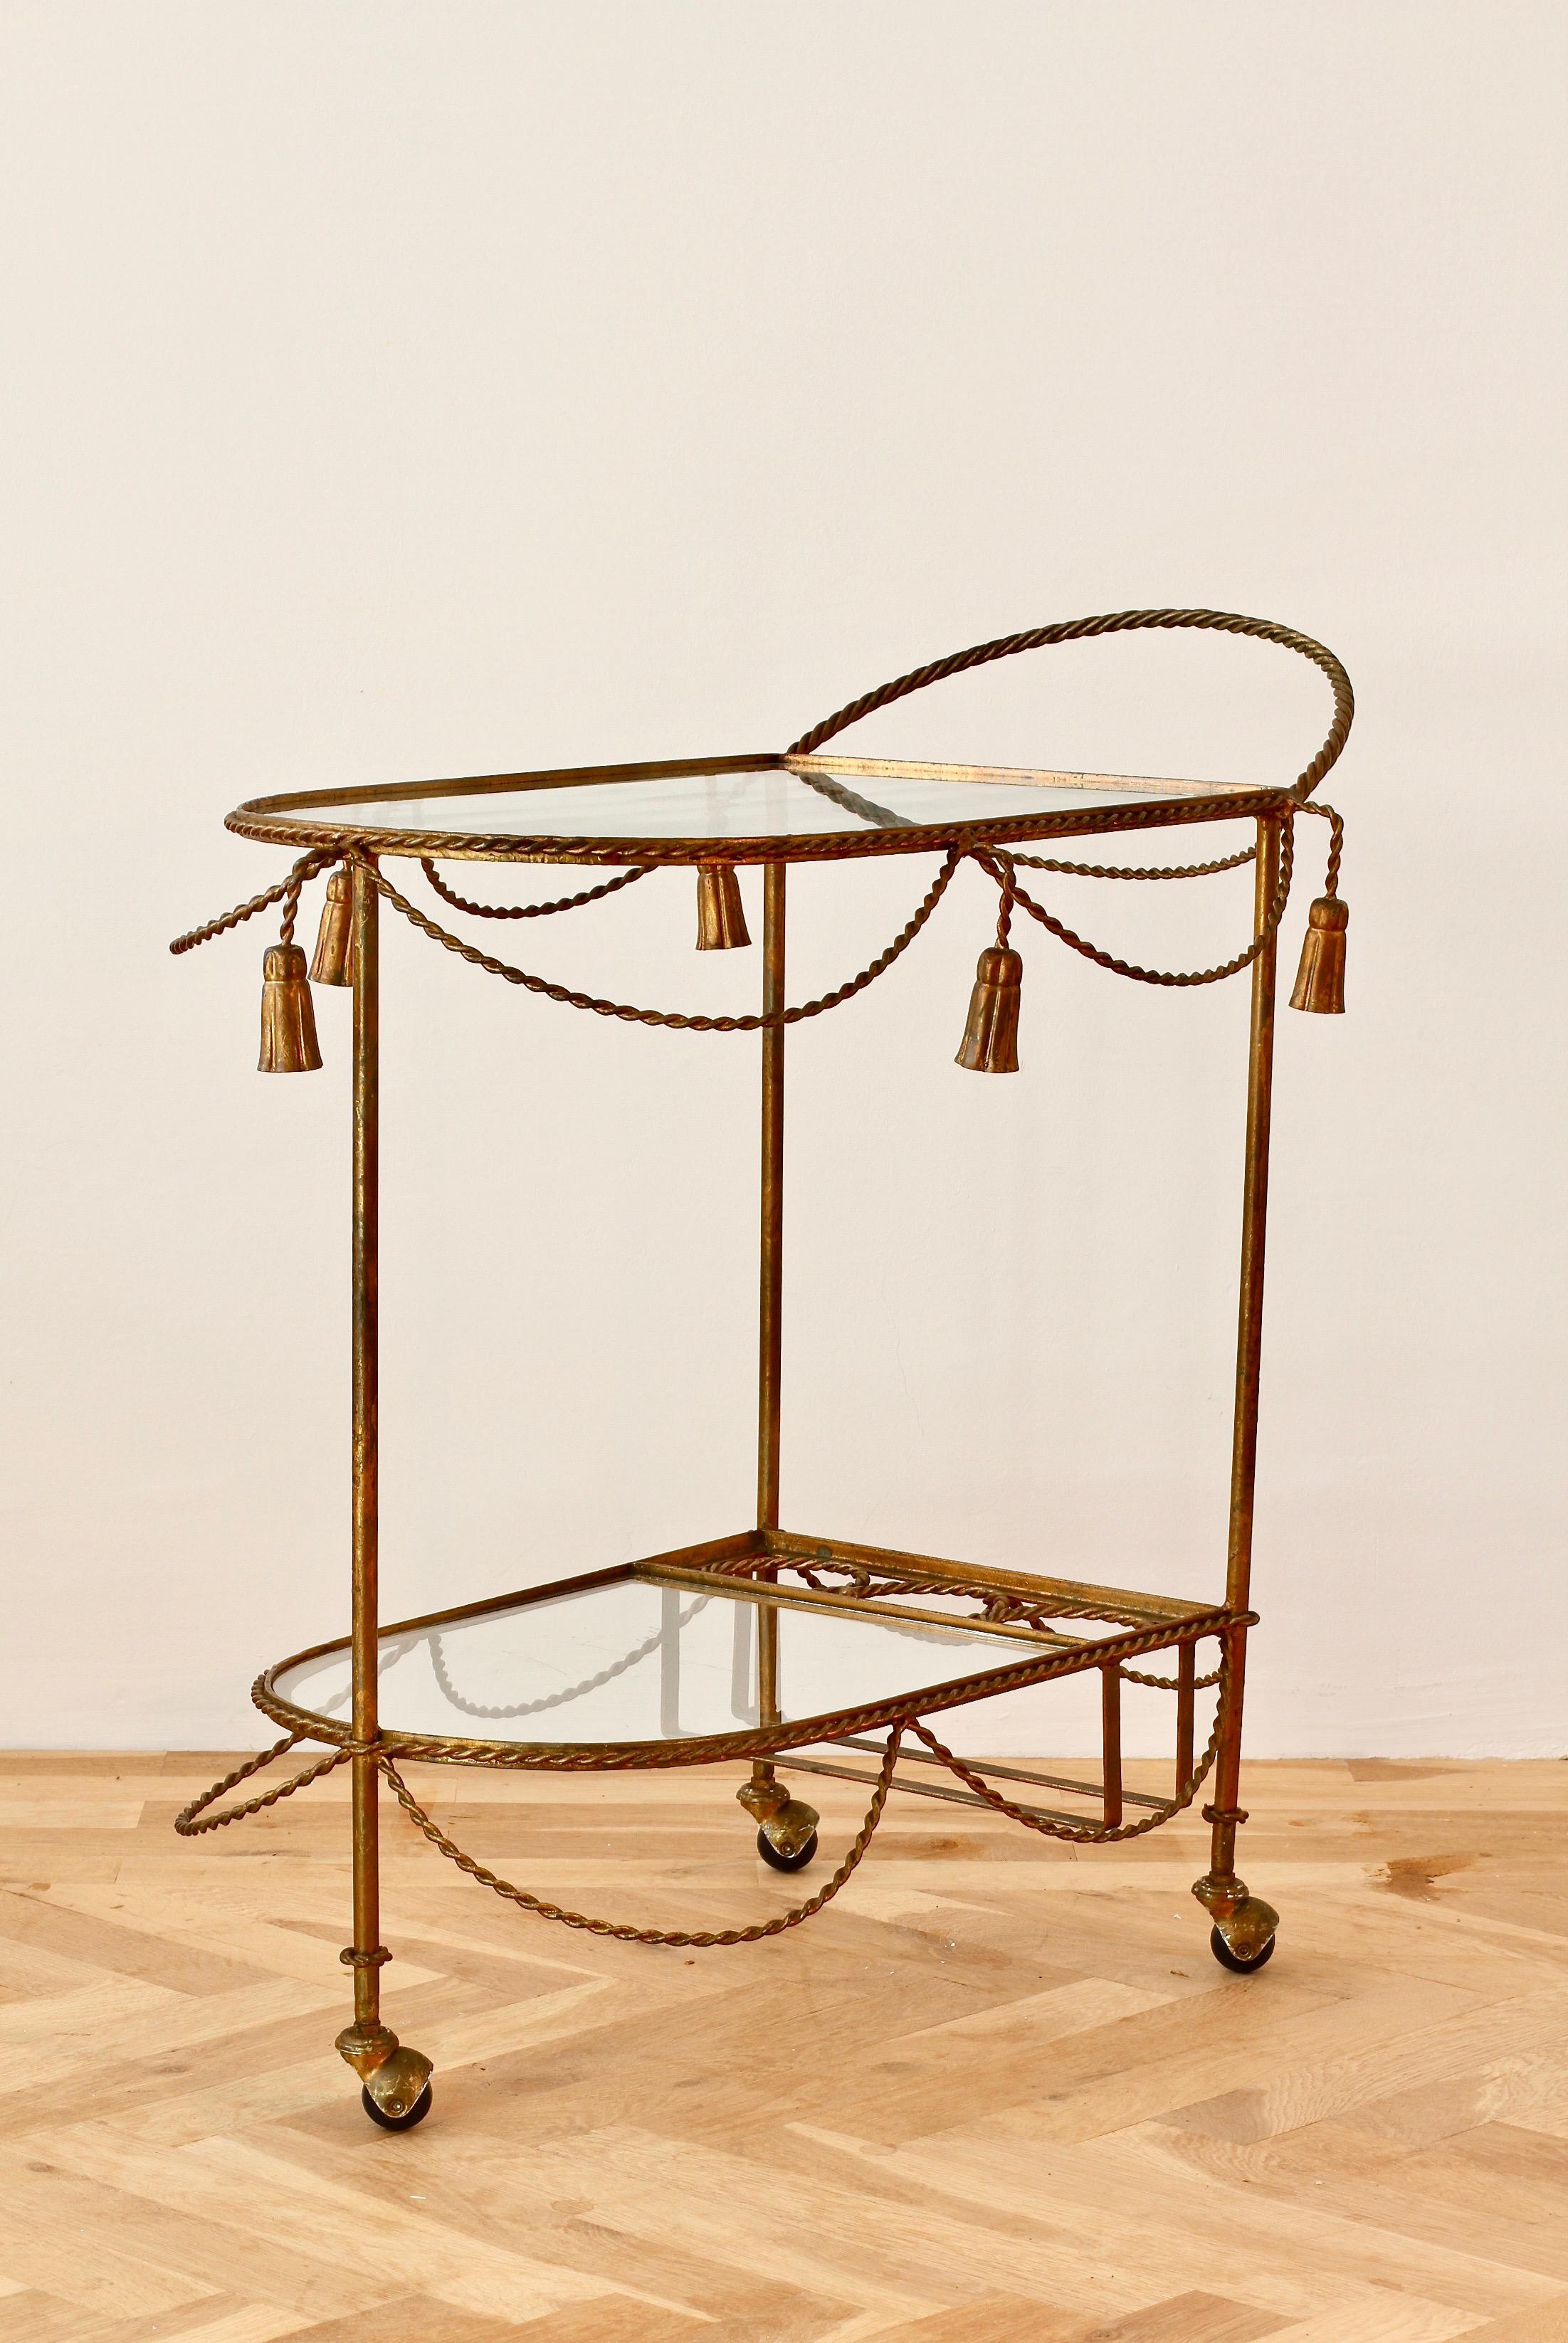 Vintage midcentury Italian Hollywood Regency bar cart / drinks trolley attributed to Li Puma Firenze, Italy circa 1950s. Made of gilt / gilded metal with beautiful twisted gold coloured rope and tassel details. Two glass shelves and integrated